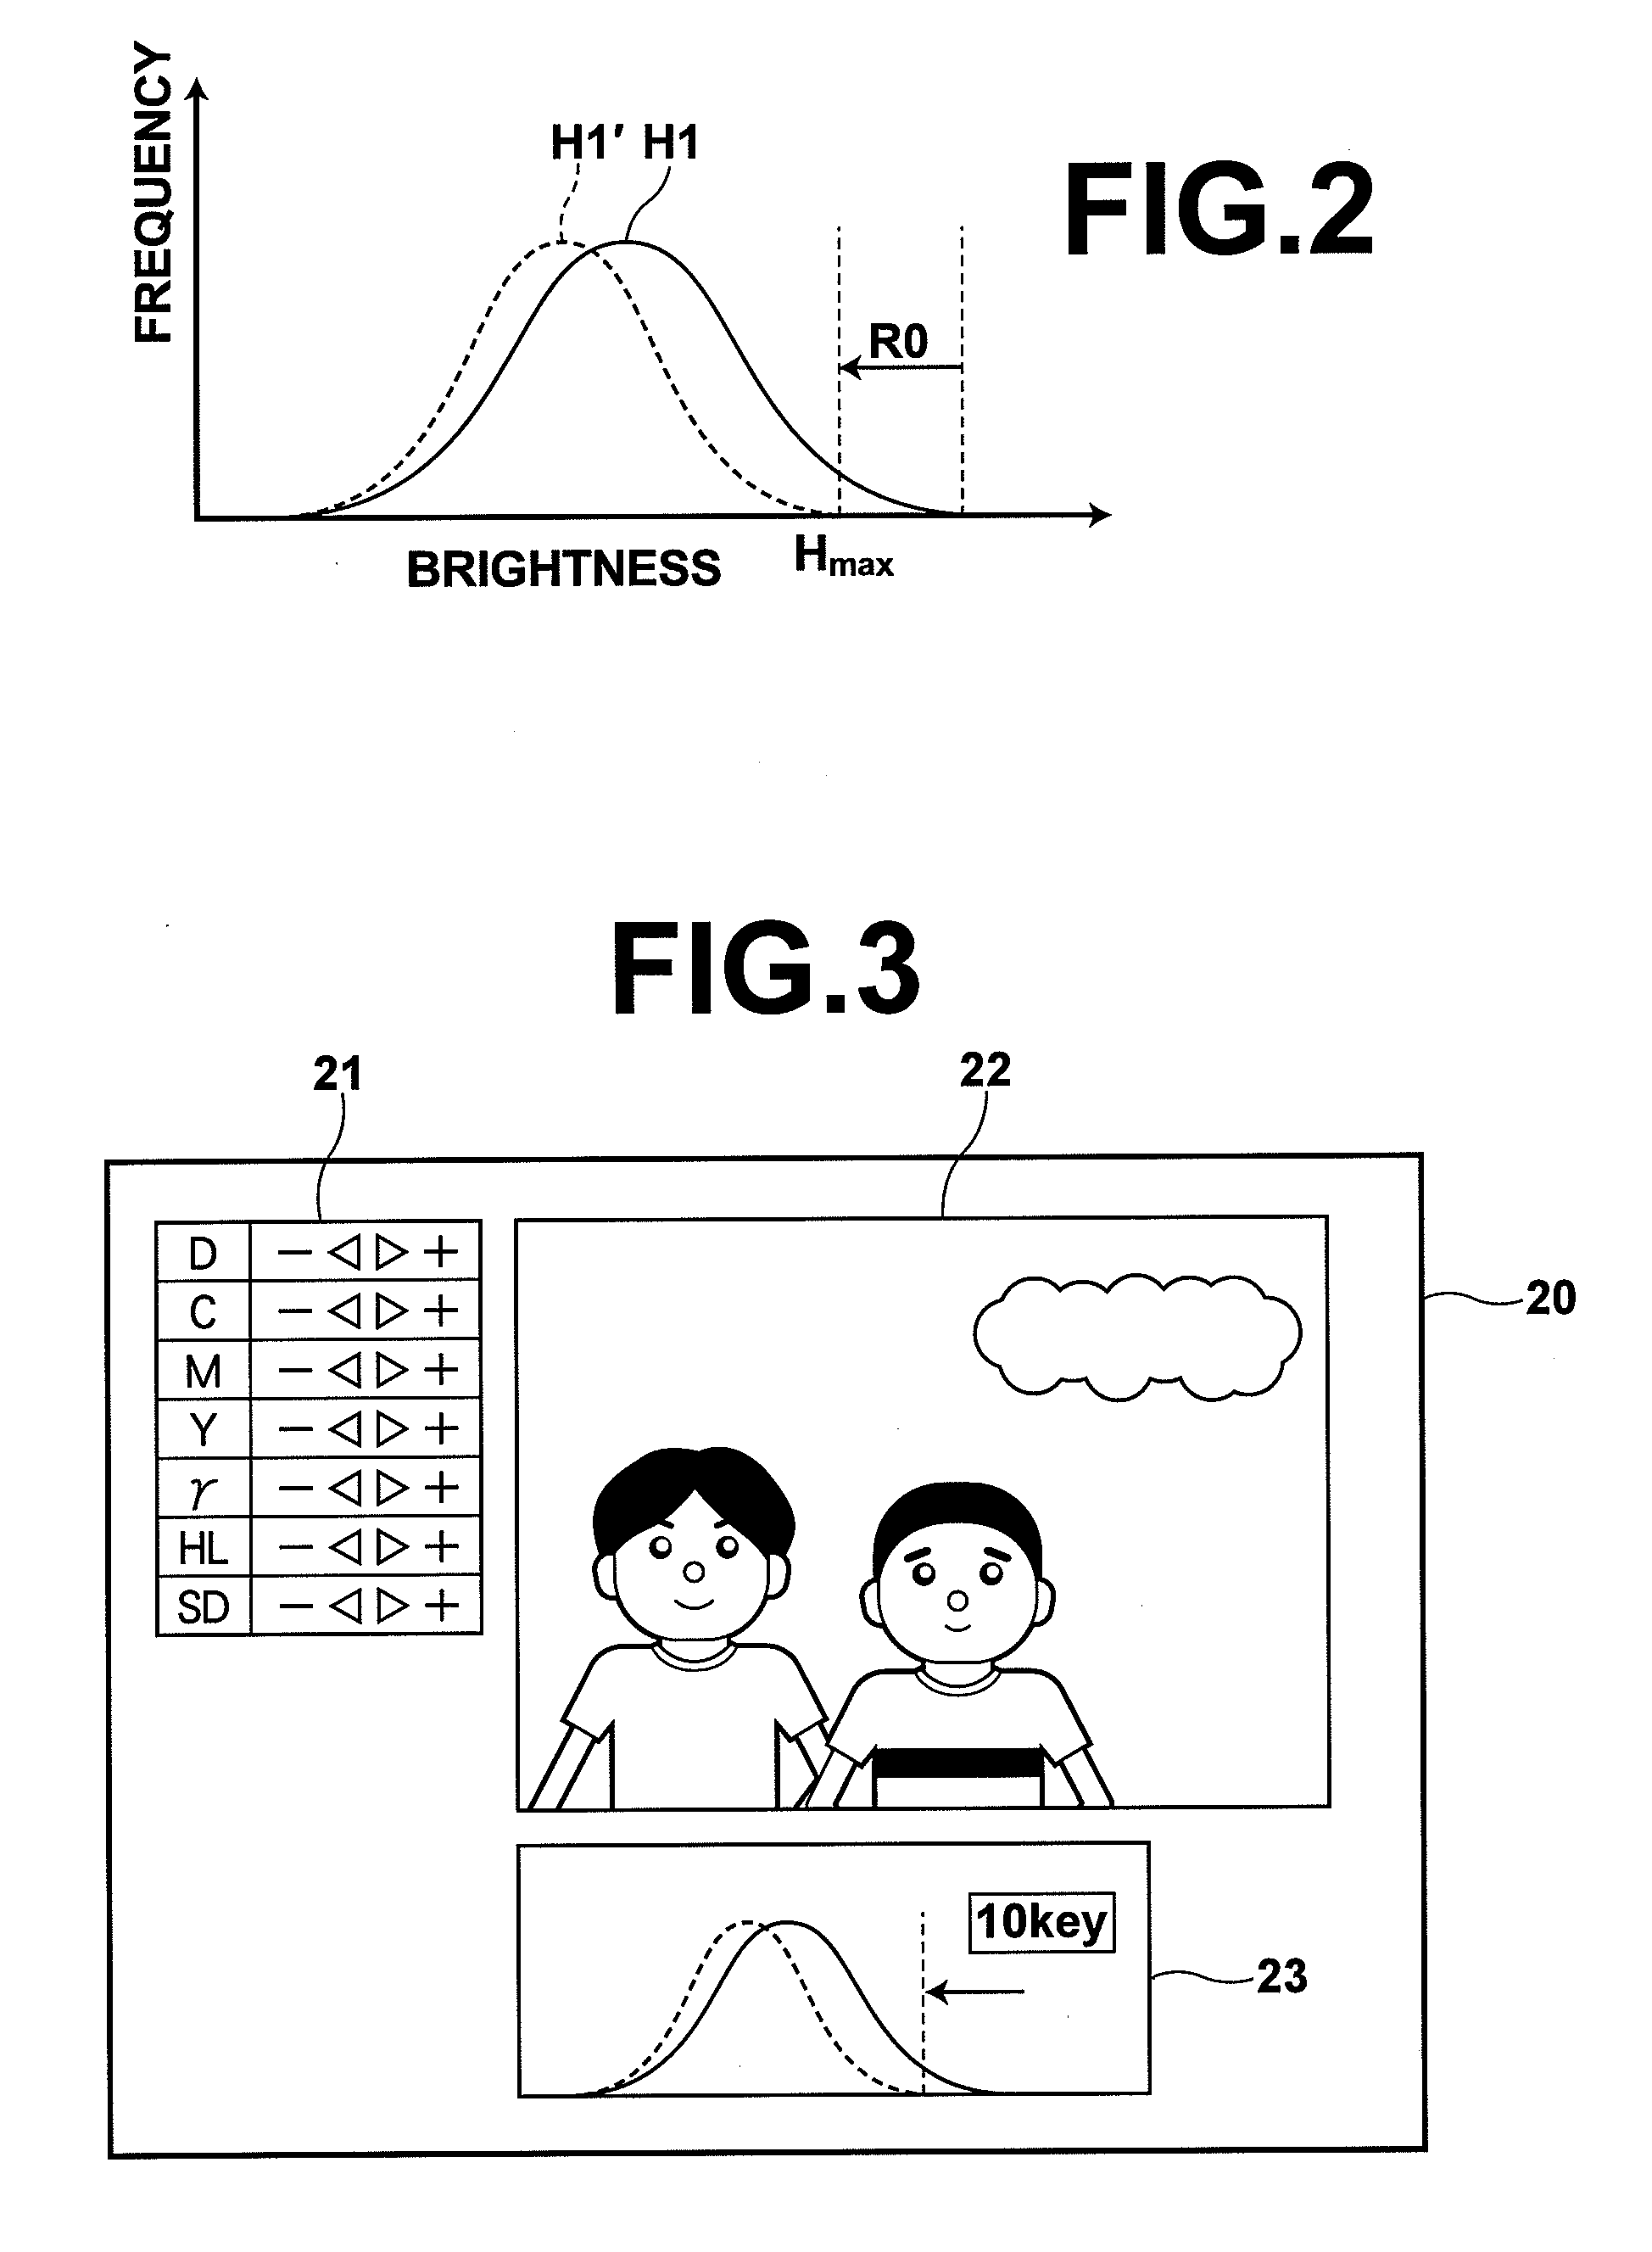 Image processing apparatus and method and computer-readable recording medium having stored therein the program